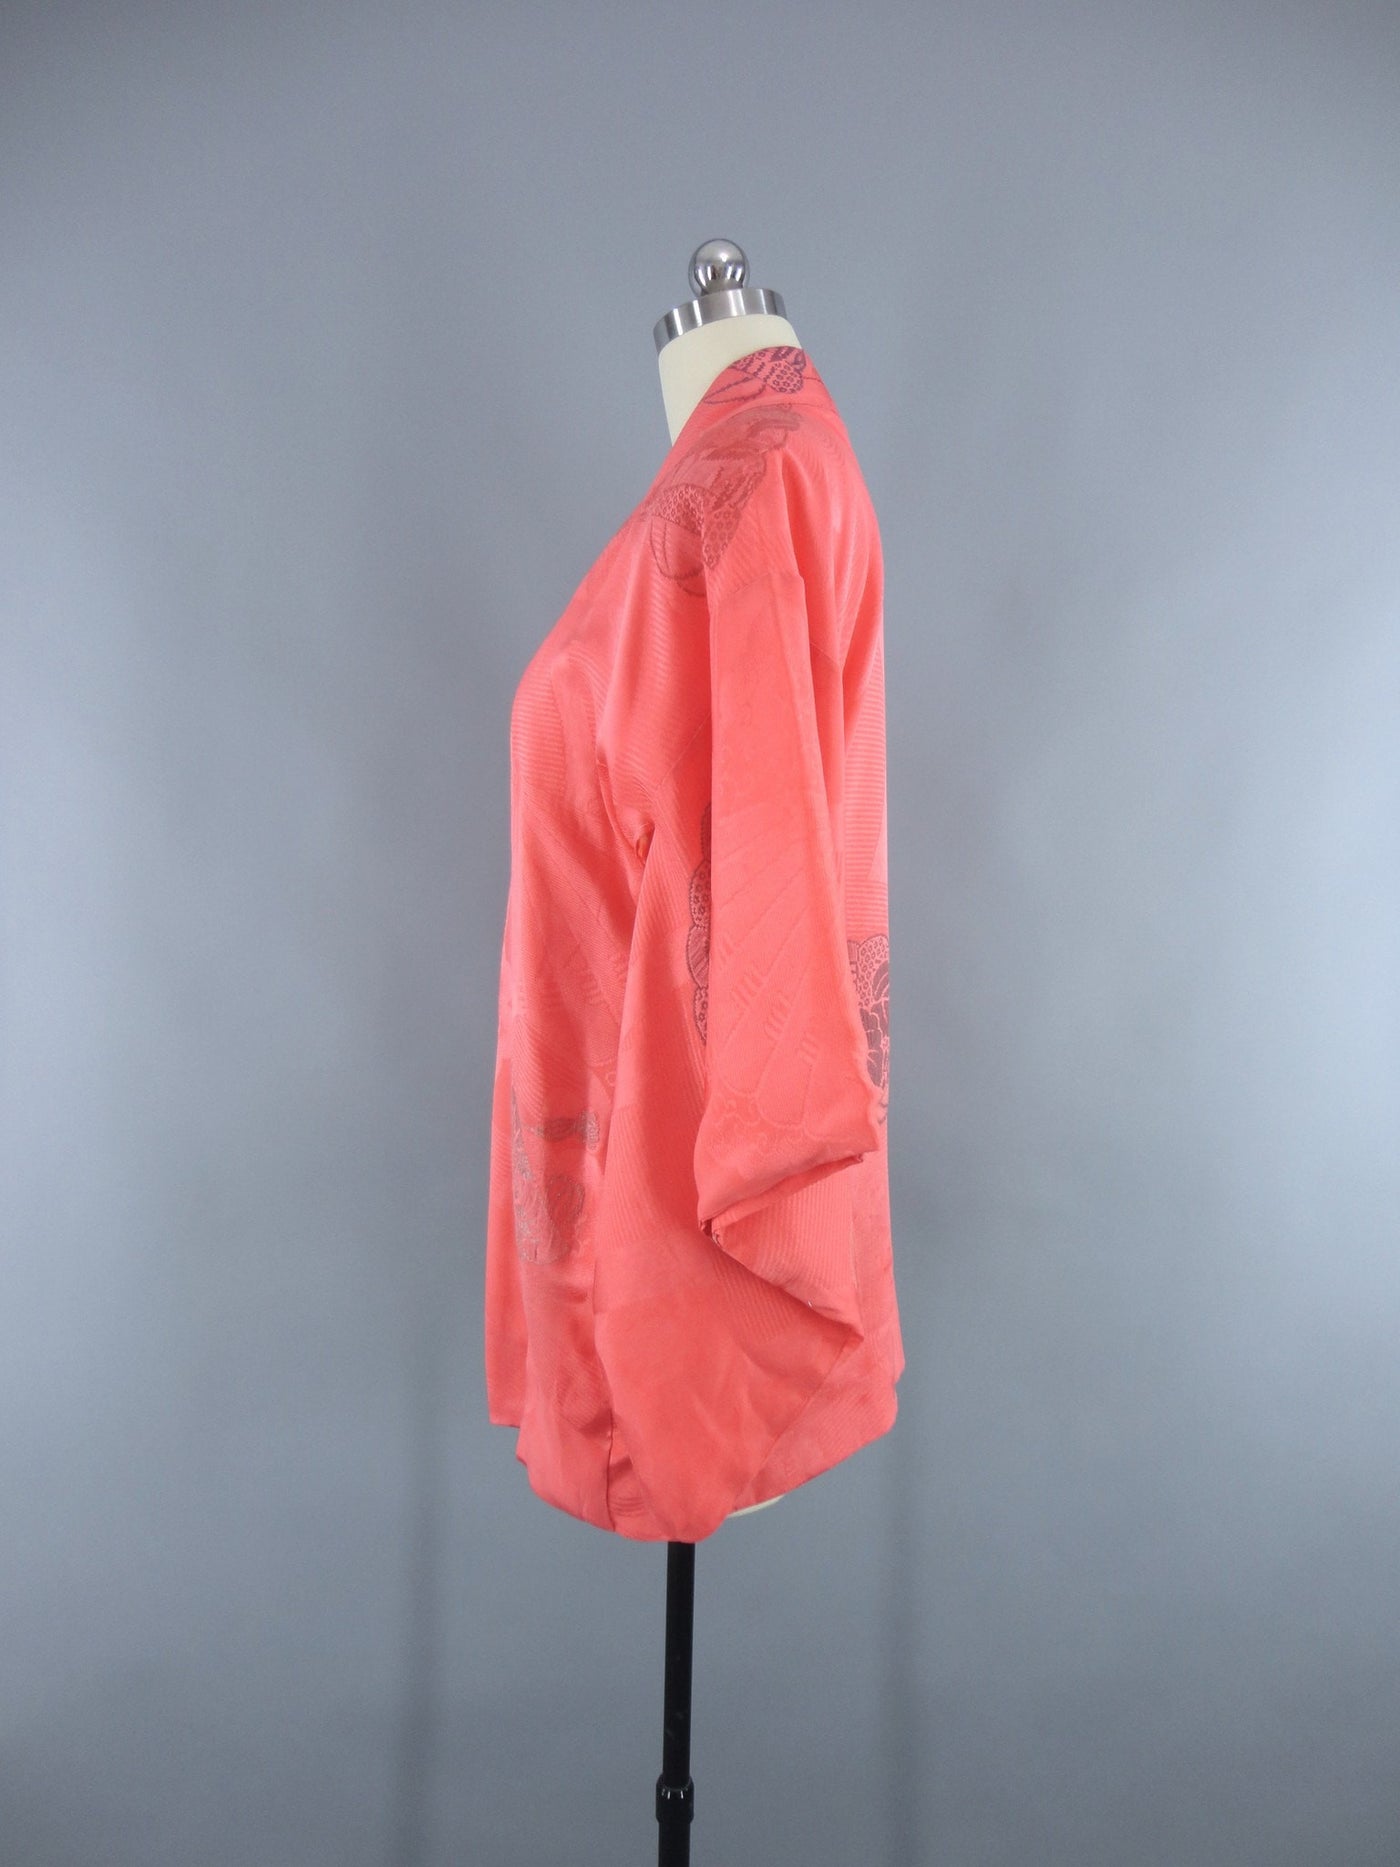 Vintage 1950s Silk Haori Kimono Jacket Cardigan with Coral Pink Floral Embroidery - ThisBlueBird